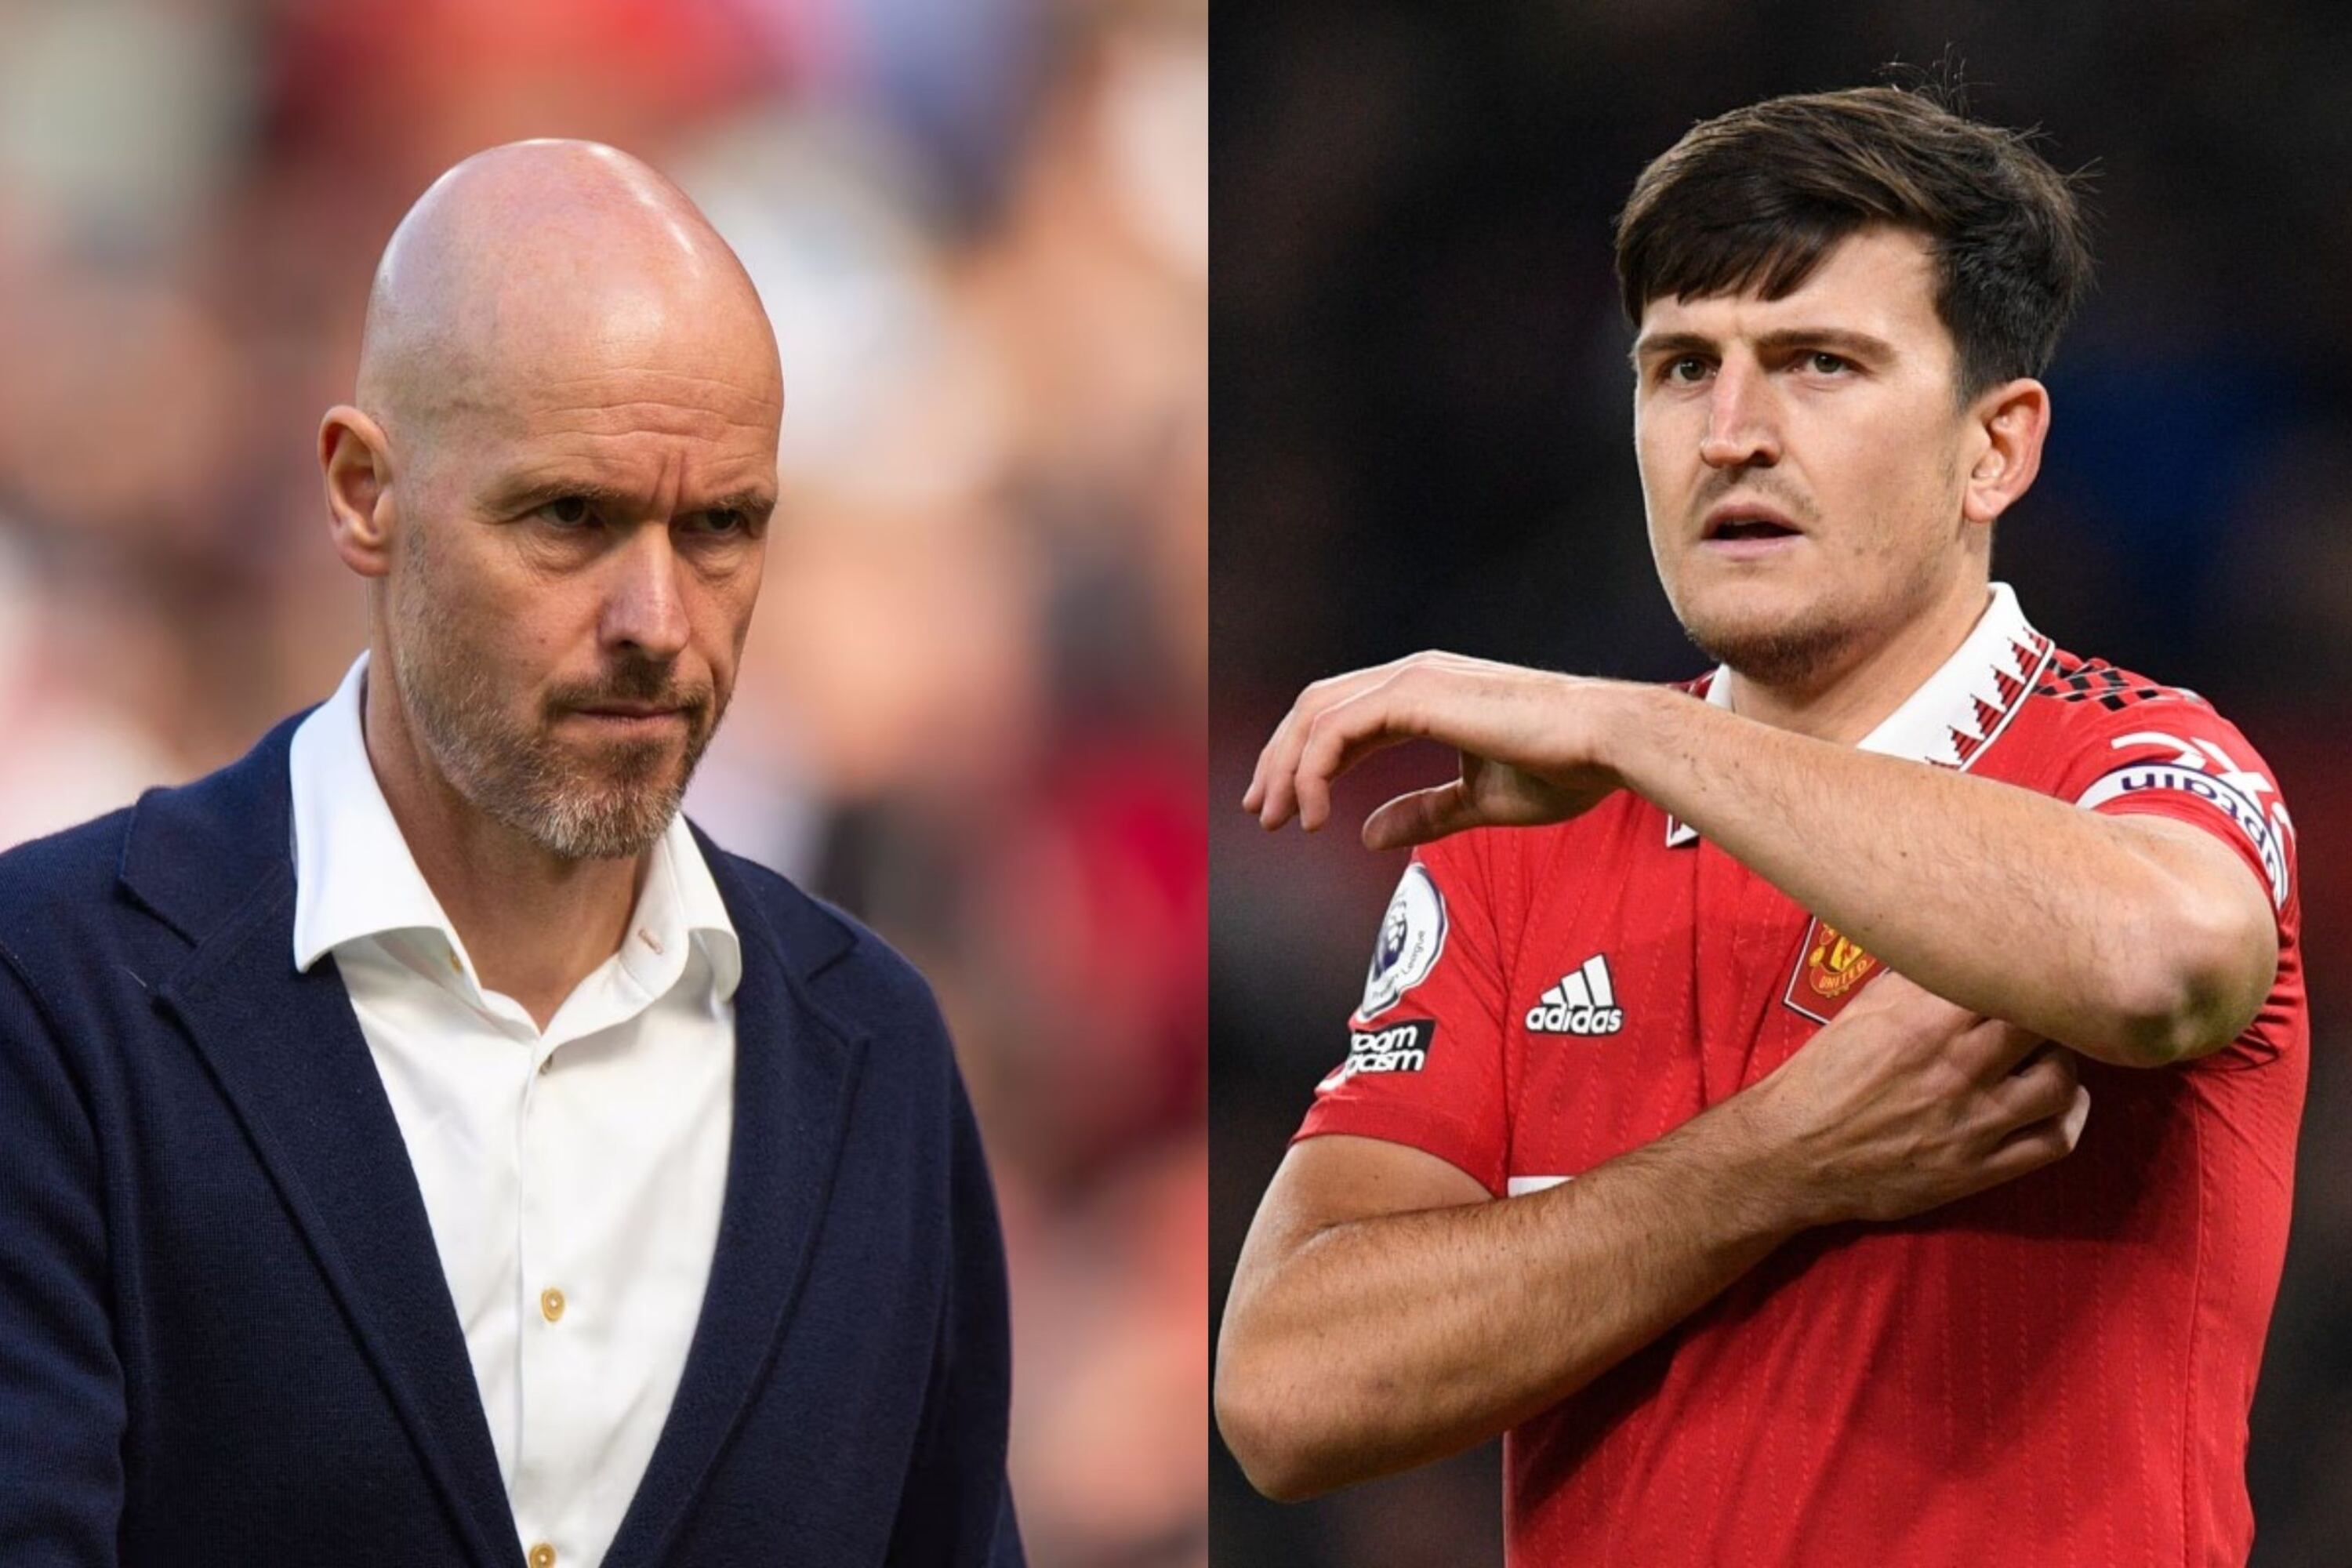 They wanted him out, Harry Maguire's lesson to his haters